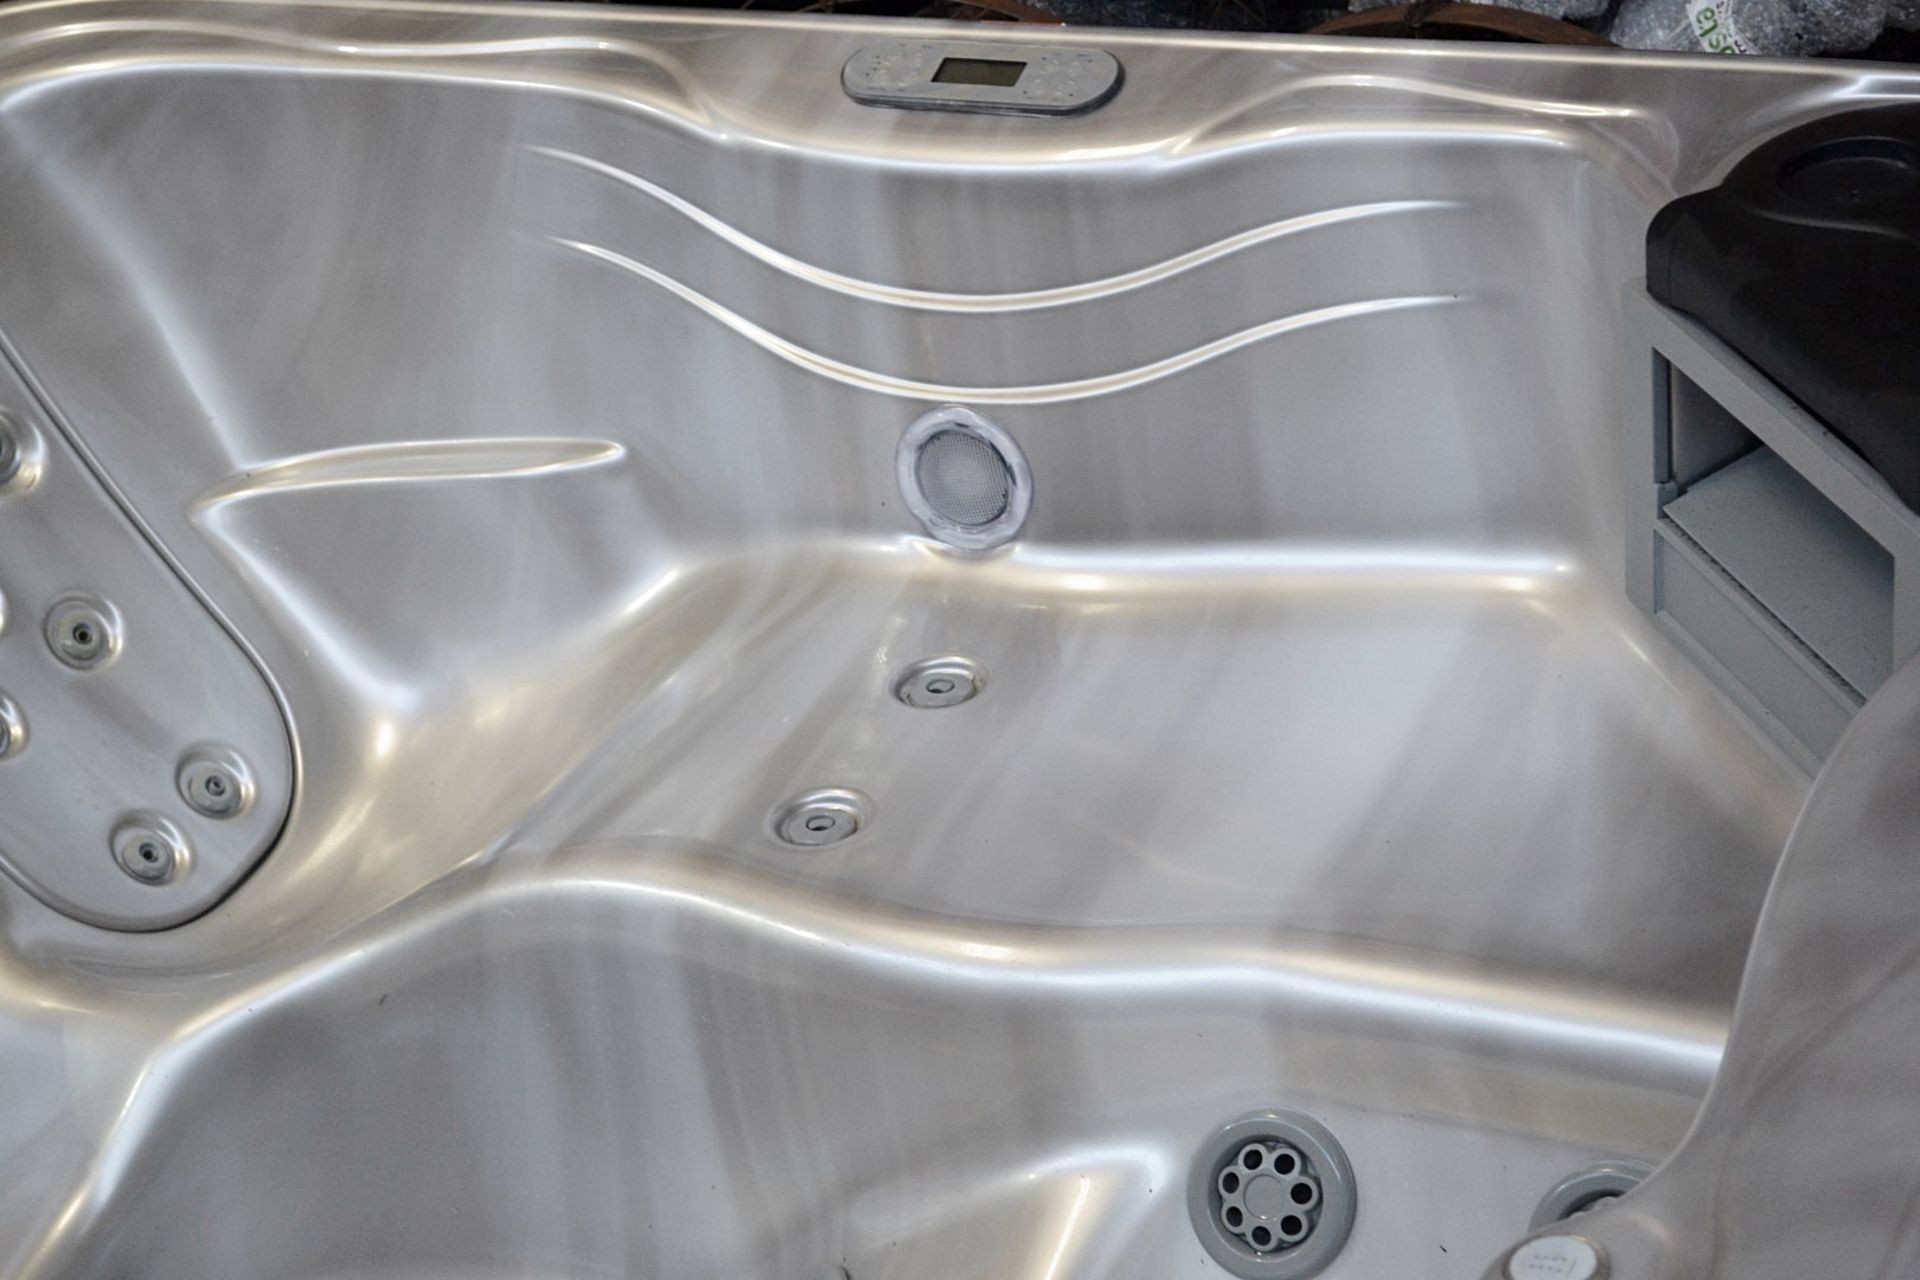 1 x Villeroy & Boch 6-Seater Hot Tub - Used In Good Working Condition - 2.4 Metres - Image 4 of 29